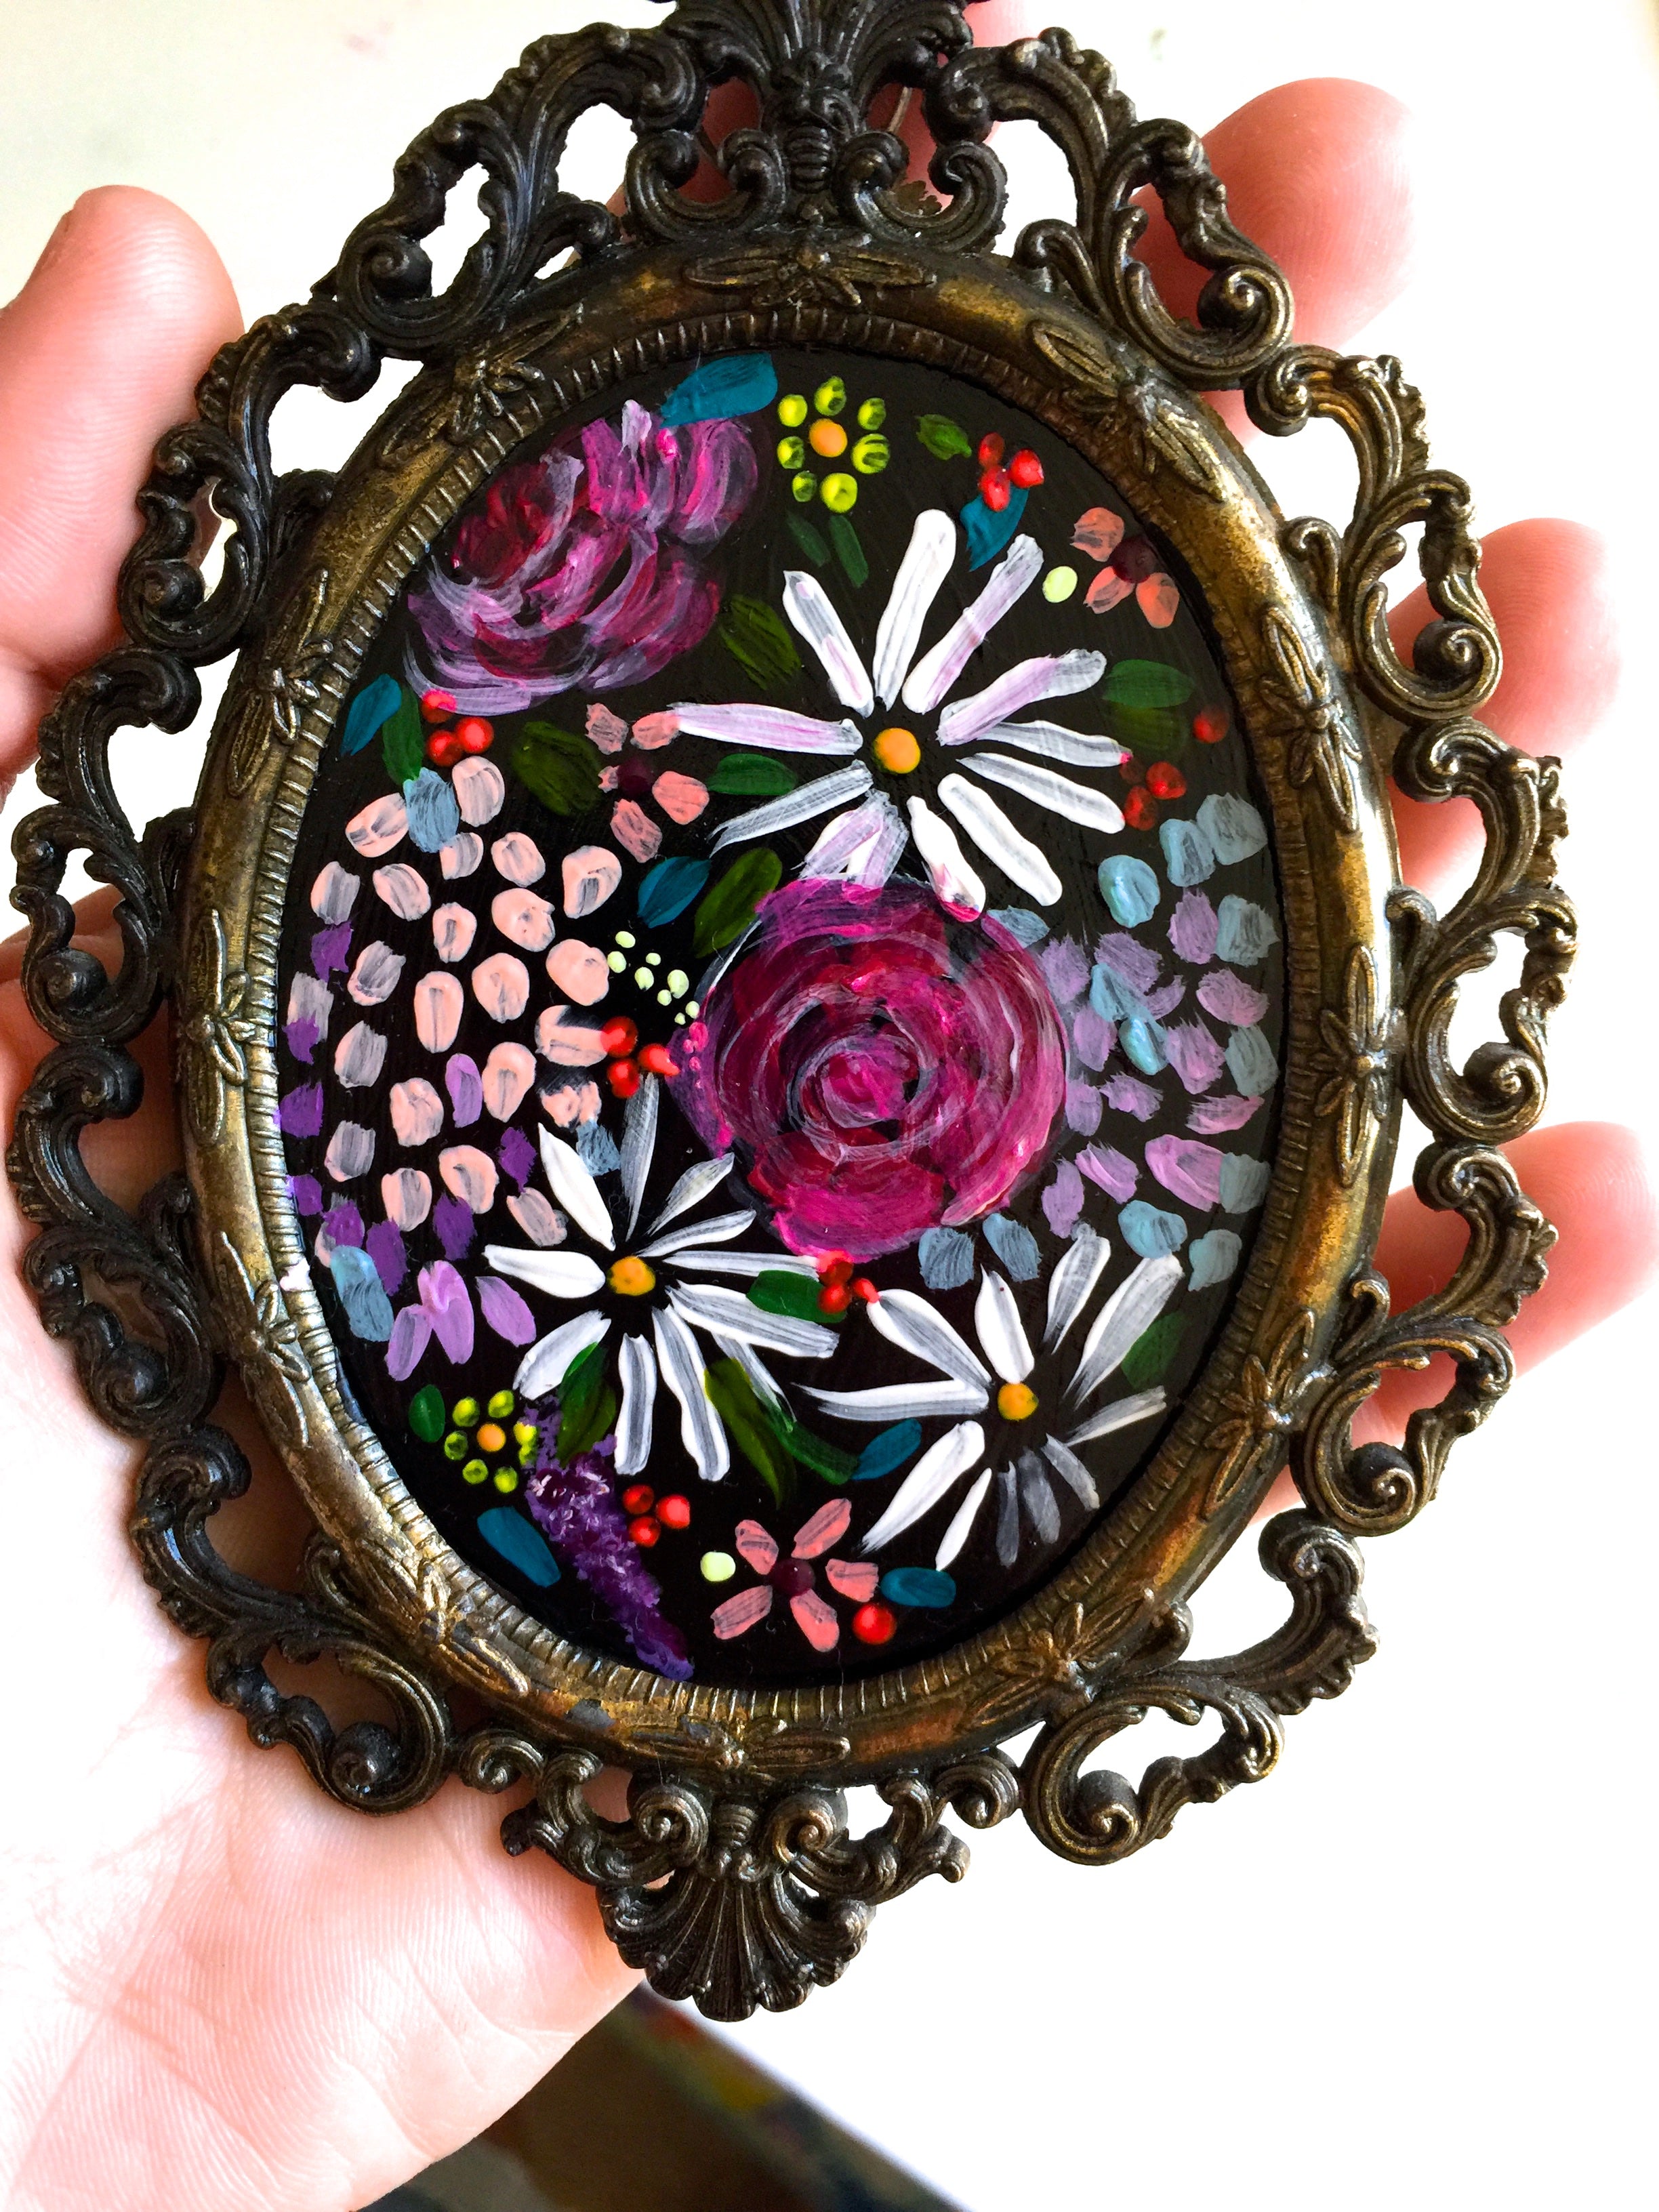 Small Floral Painting with Vibrant Colorful Florals in Pretty Oval Vintage Frame.